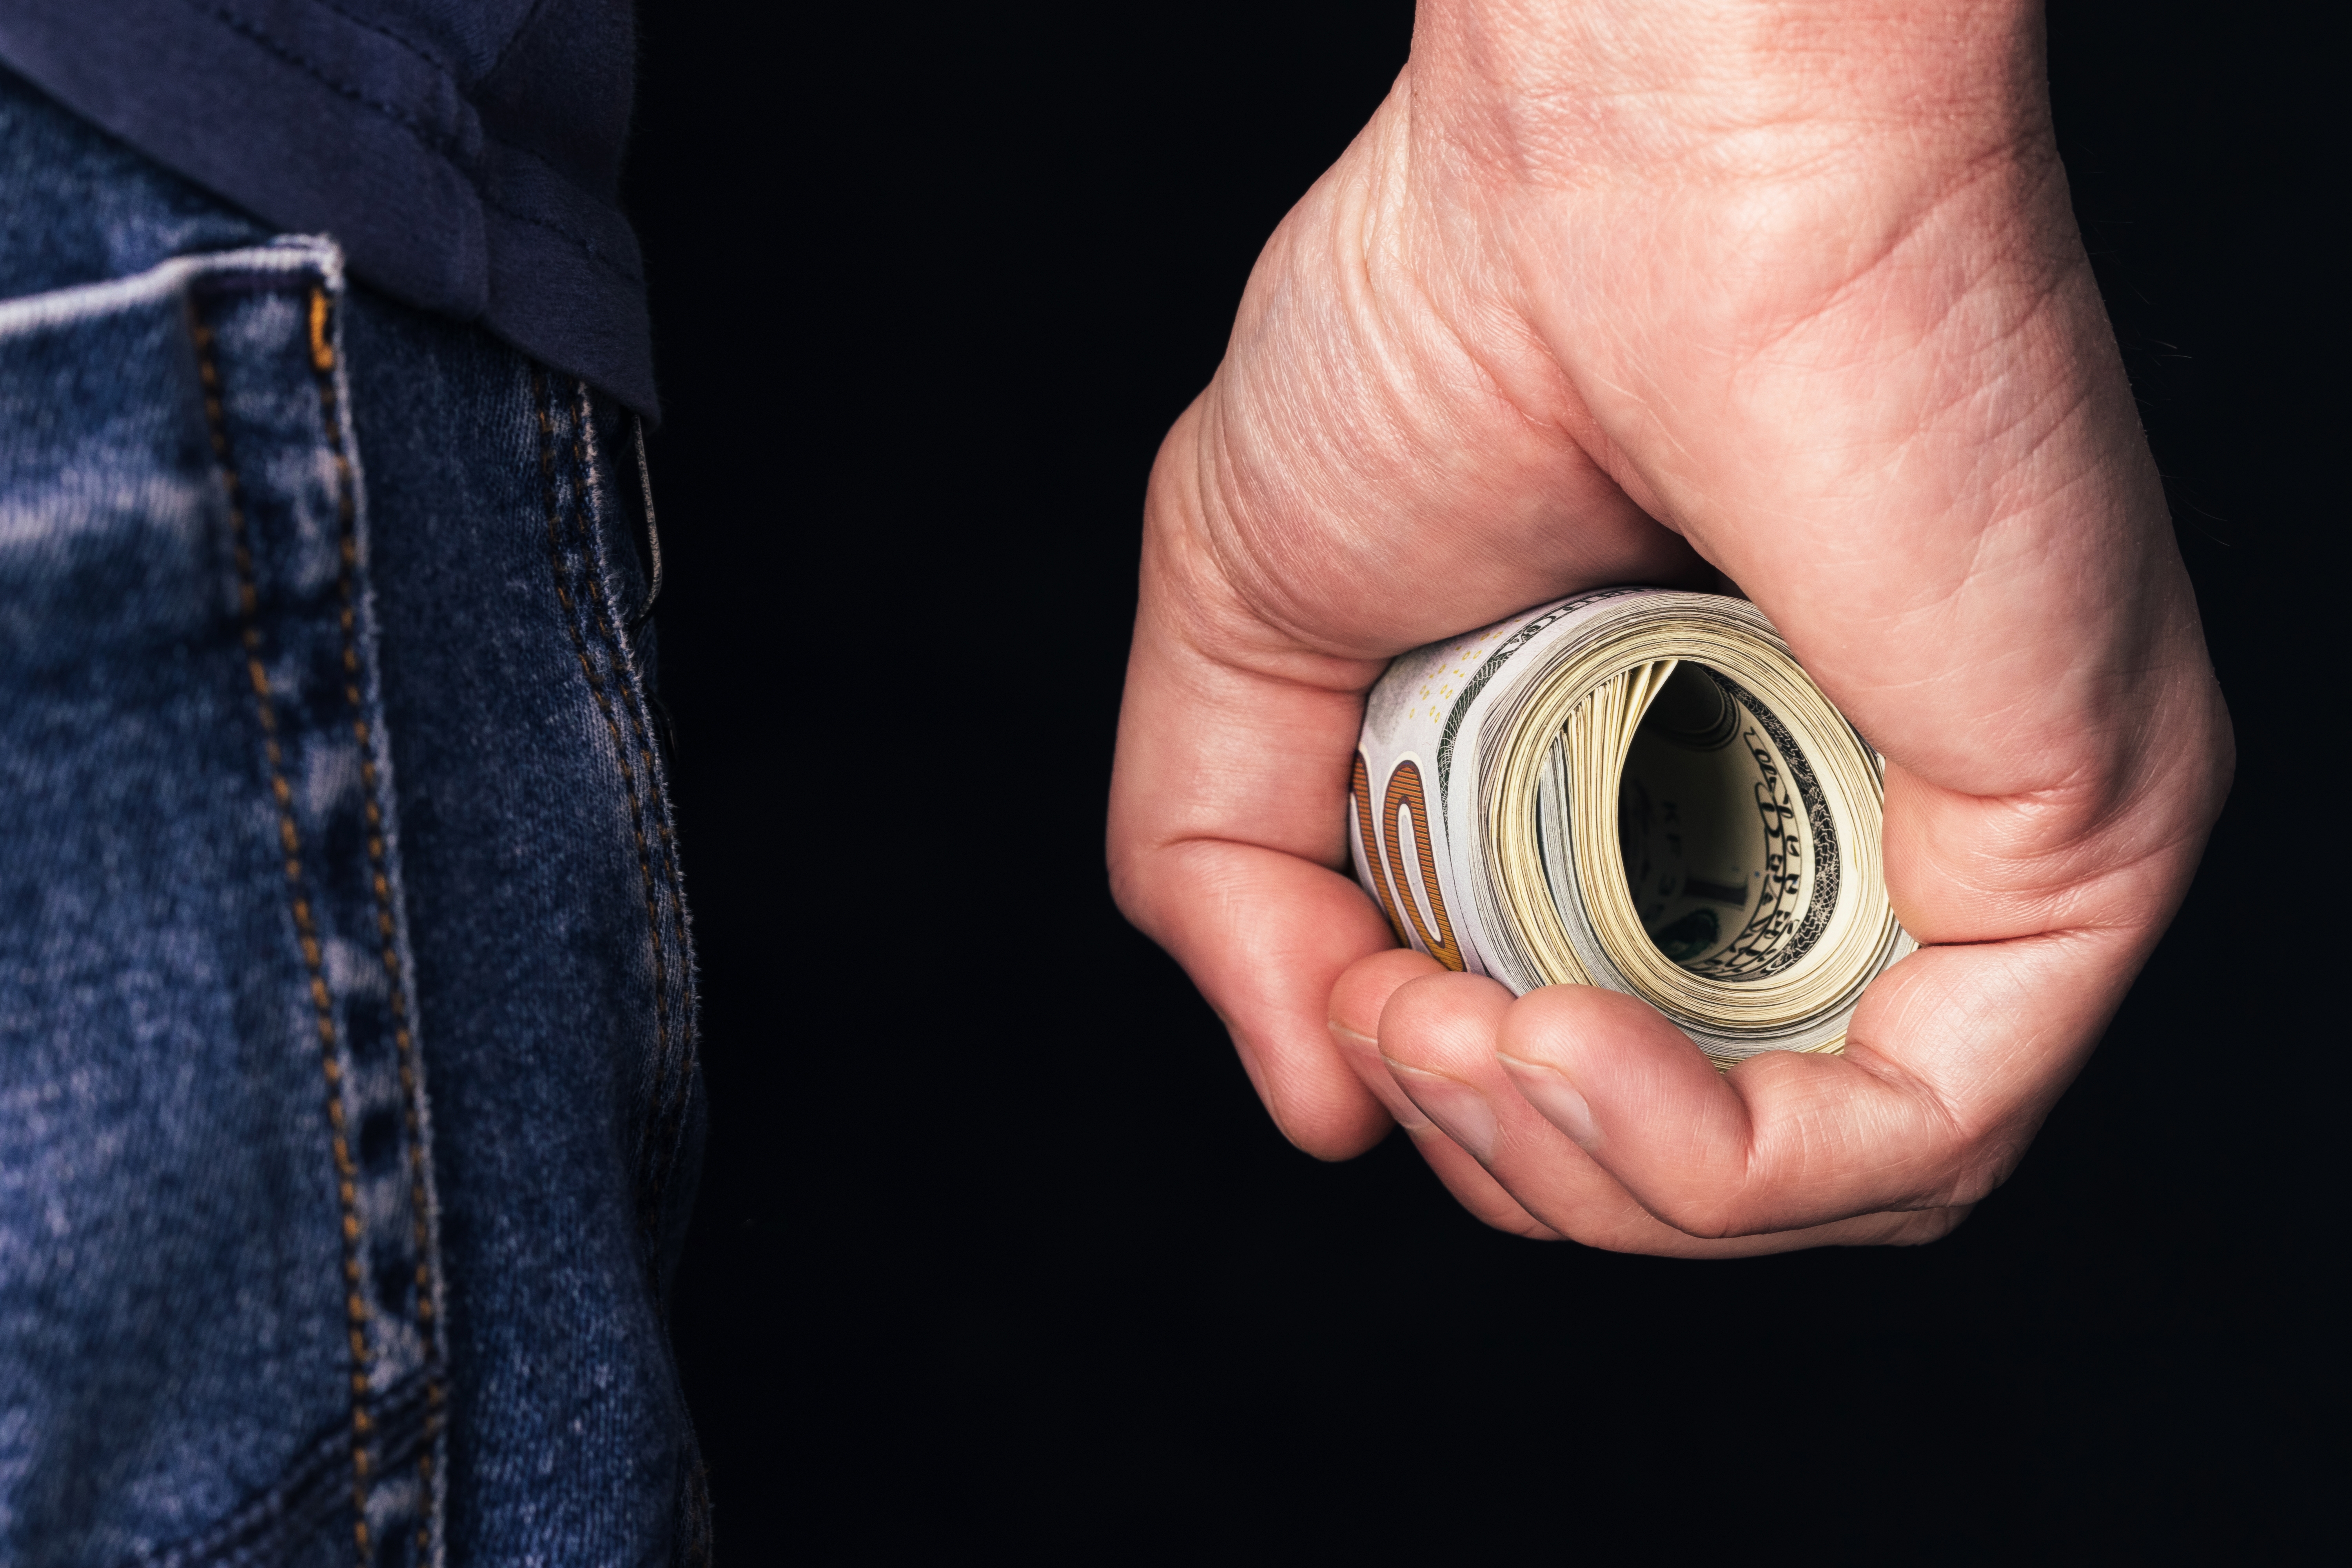 A wad of cash in a male's fist  | Source: Shutterstock